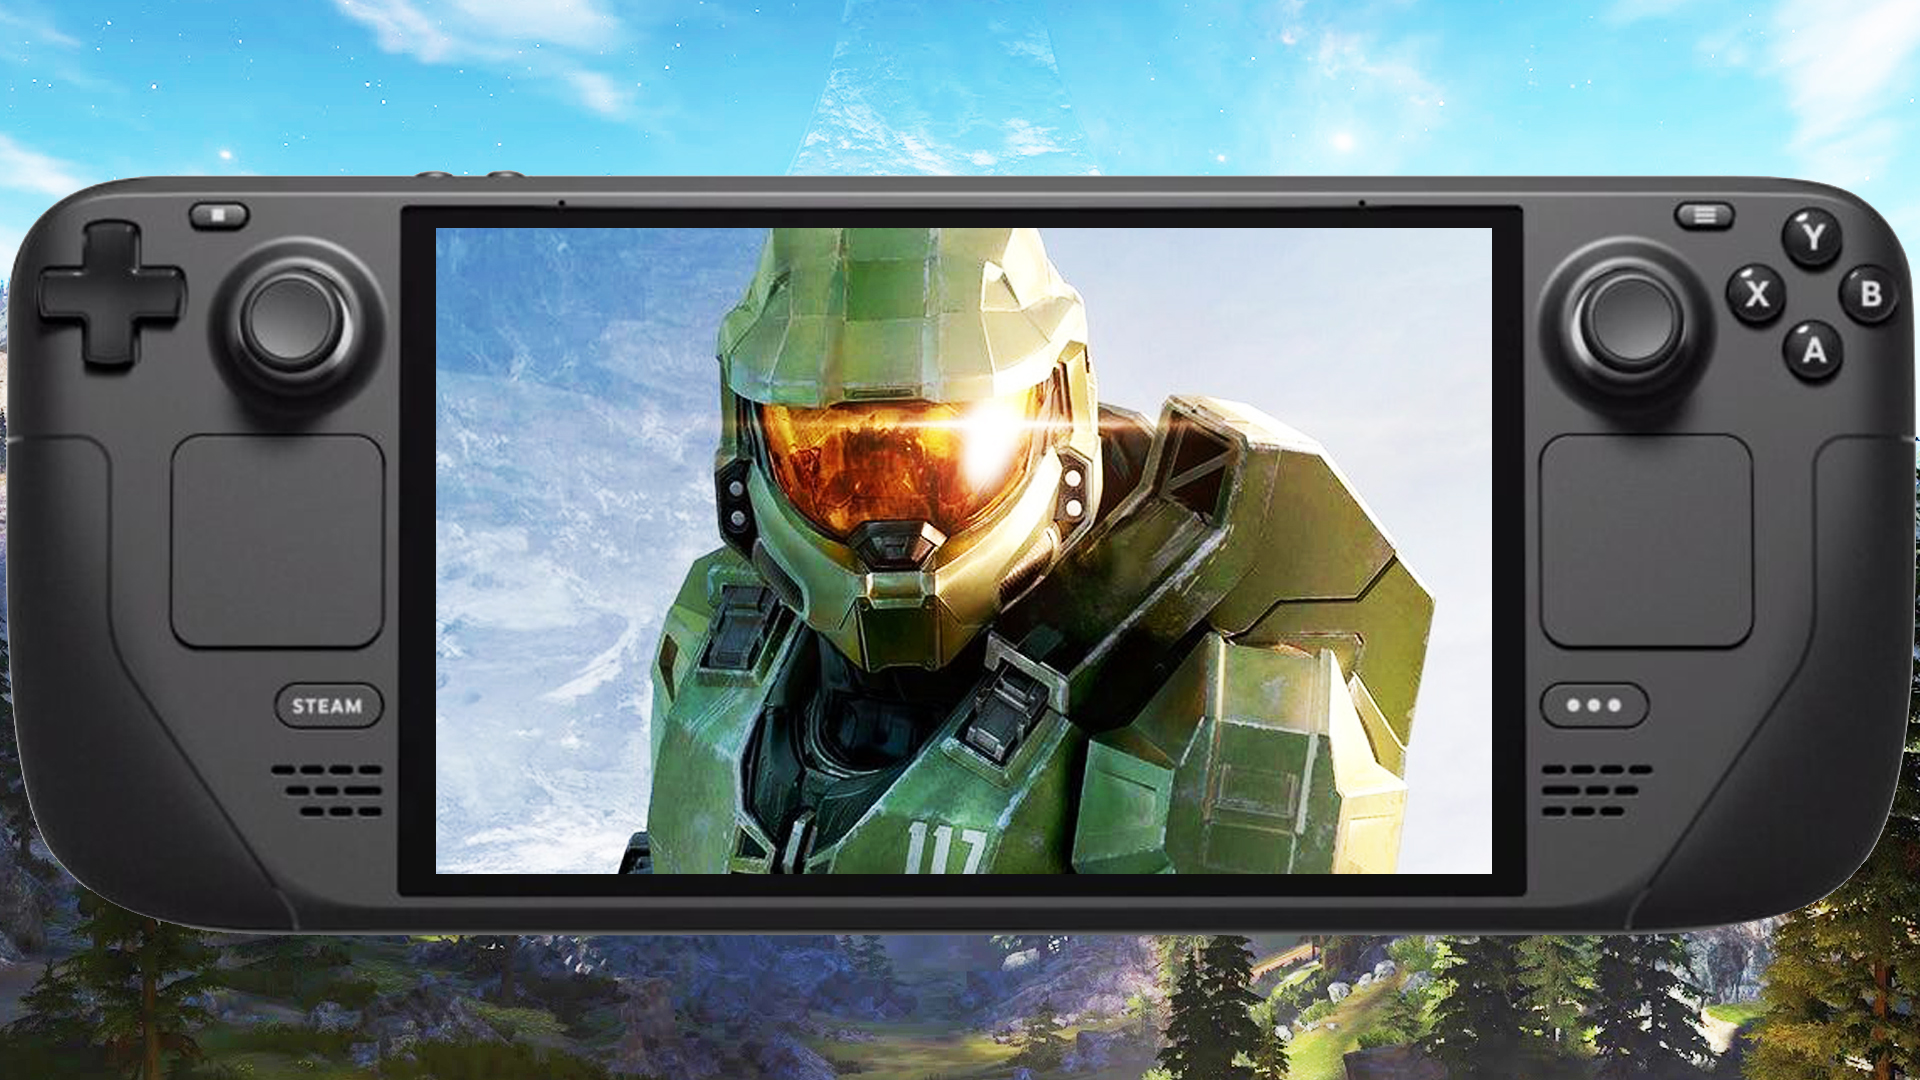 Steam data shows almost no one plays Halo Infinite anymore - Neowin